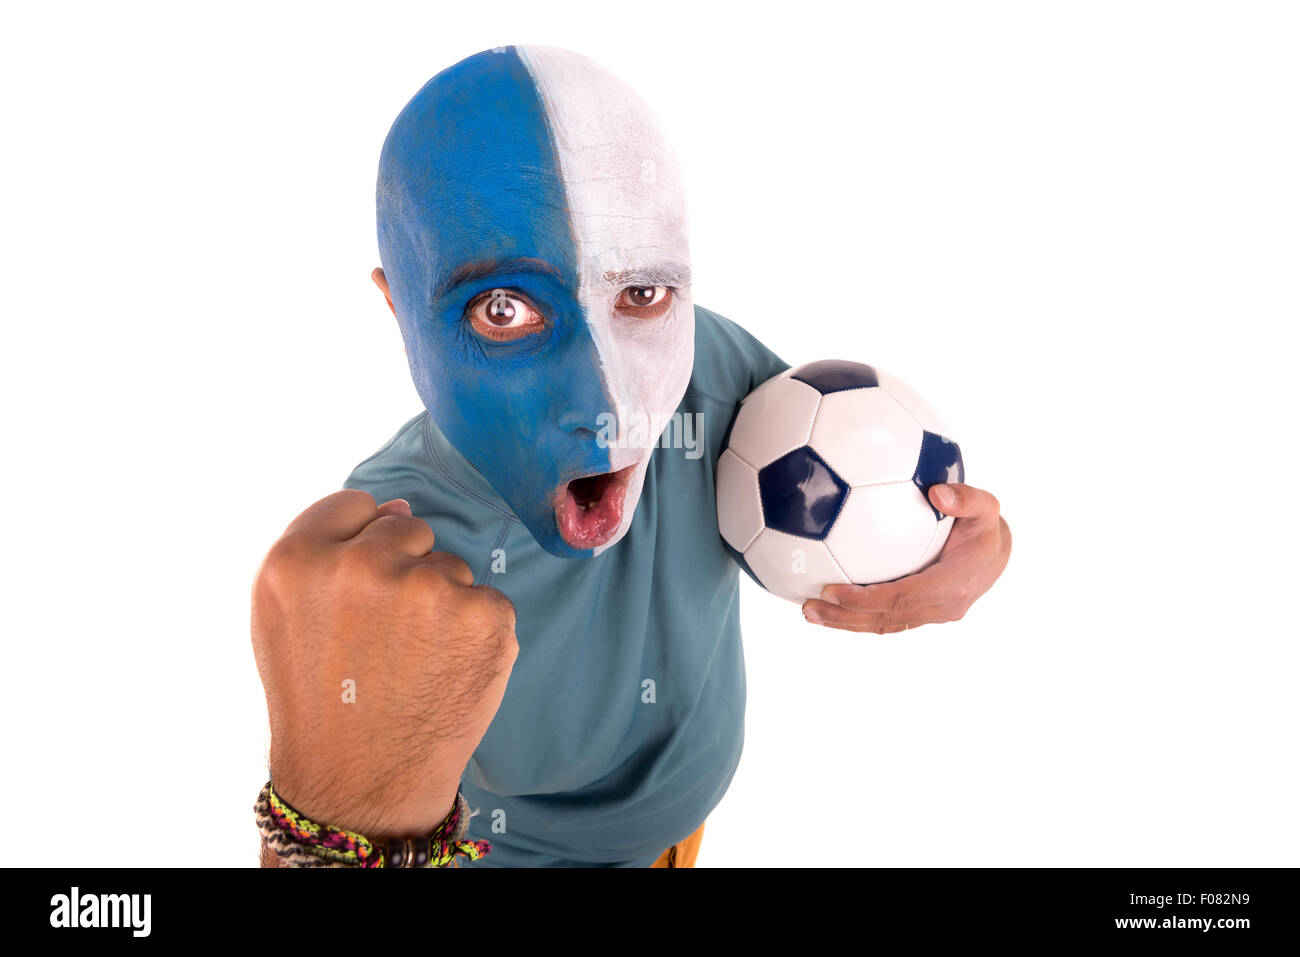 Football supporter with painted face with ball Stock Photo